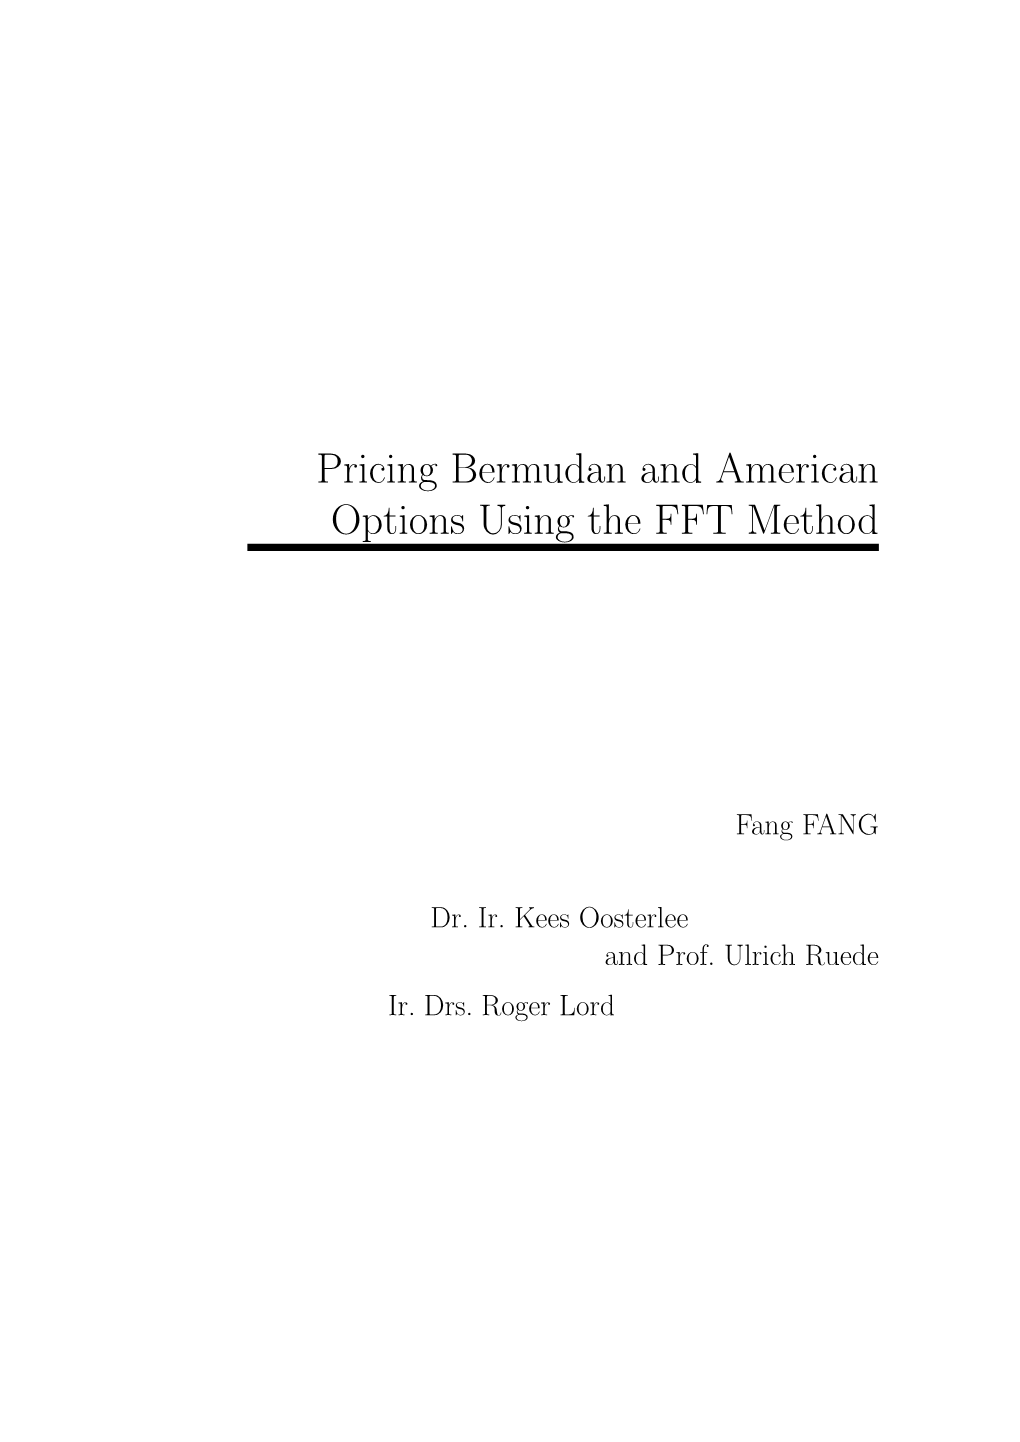 Pricing Bermudan and American Options Using the FFT Method